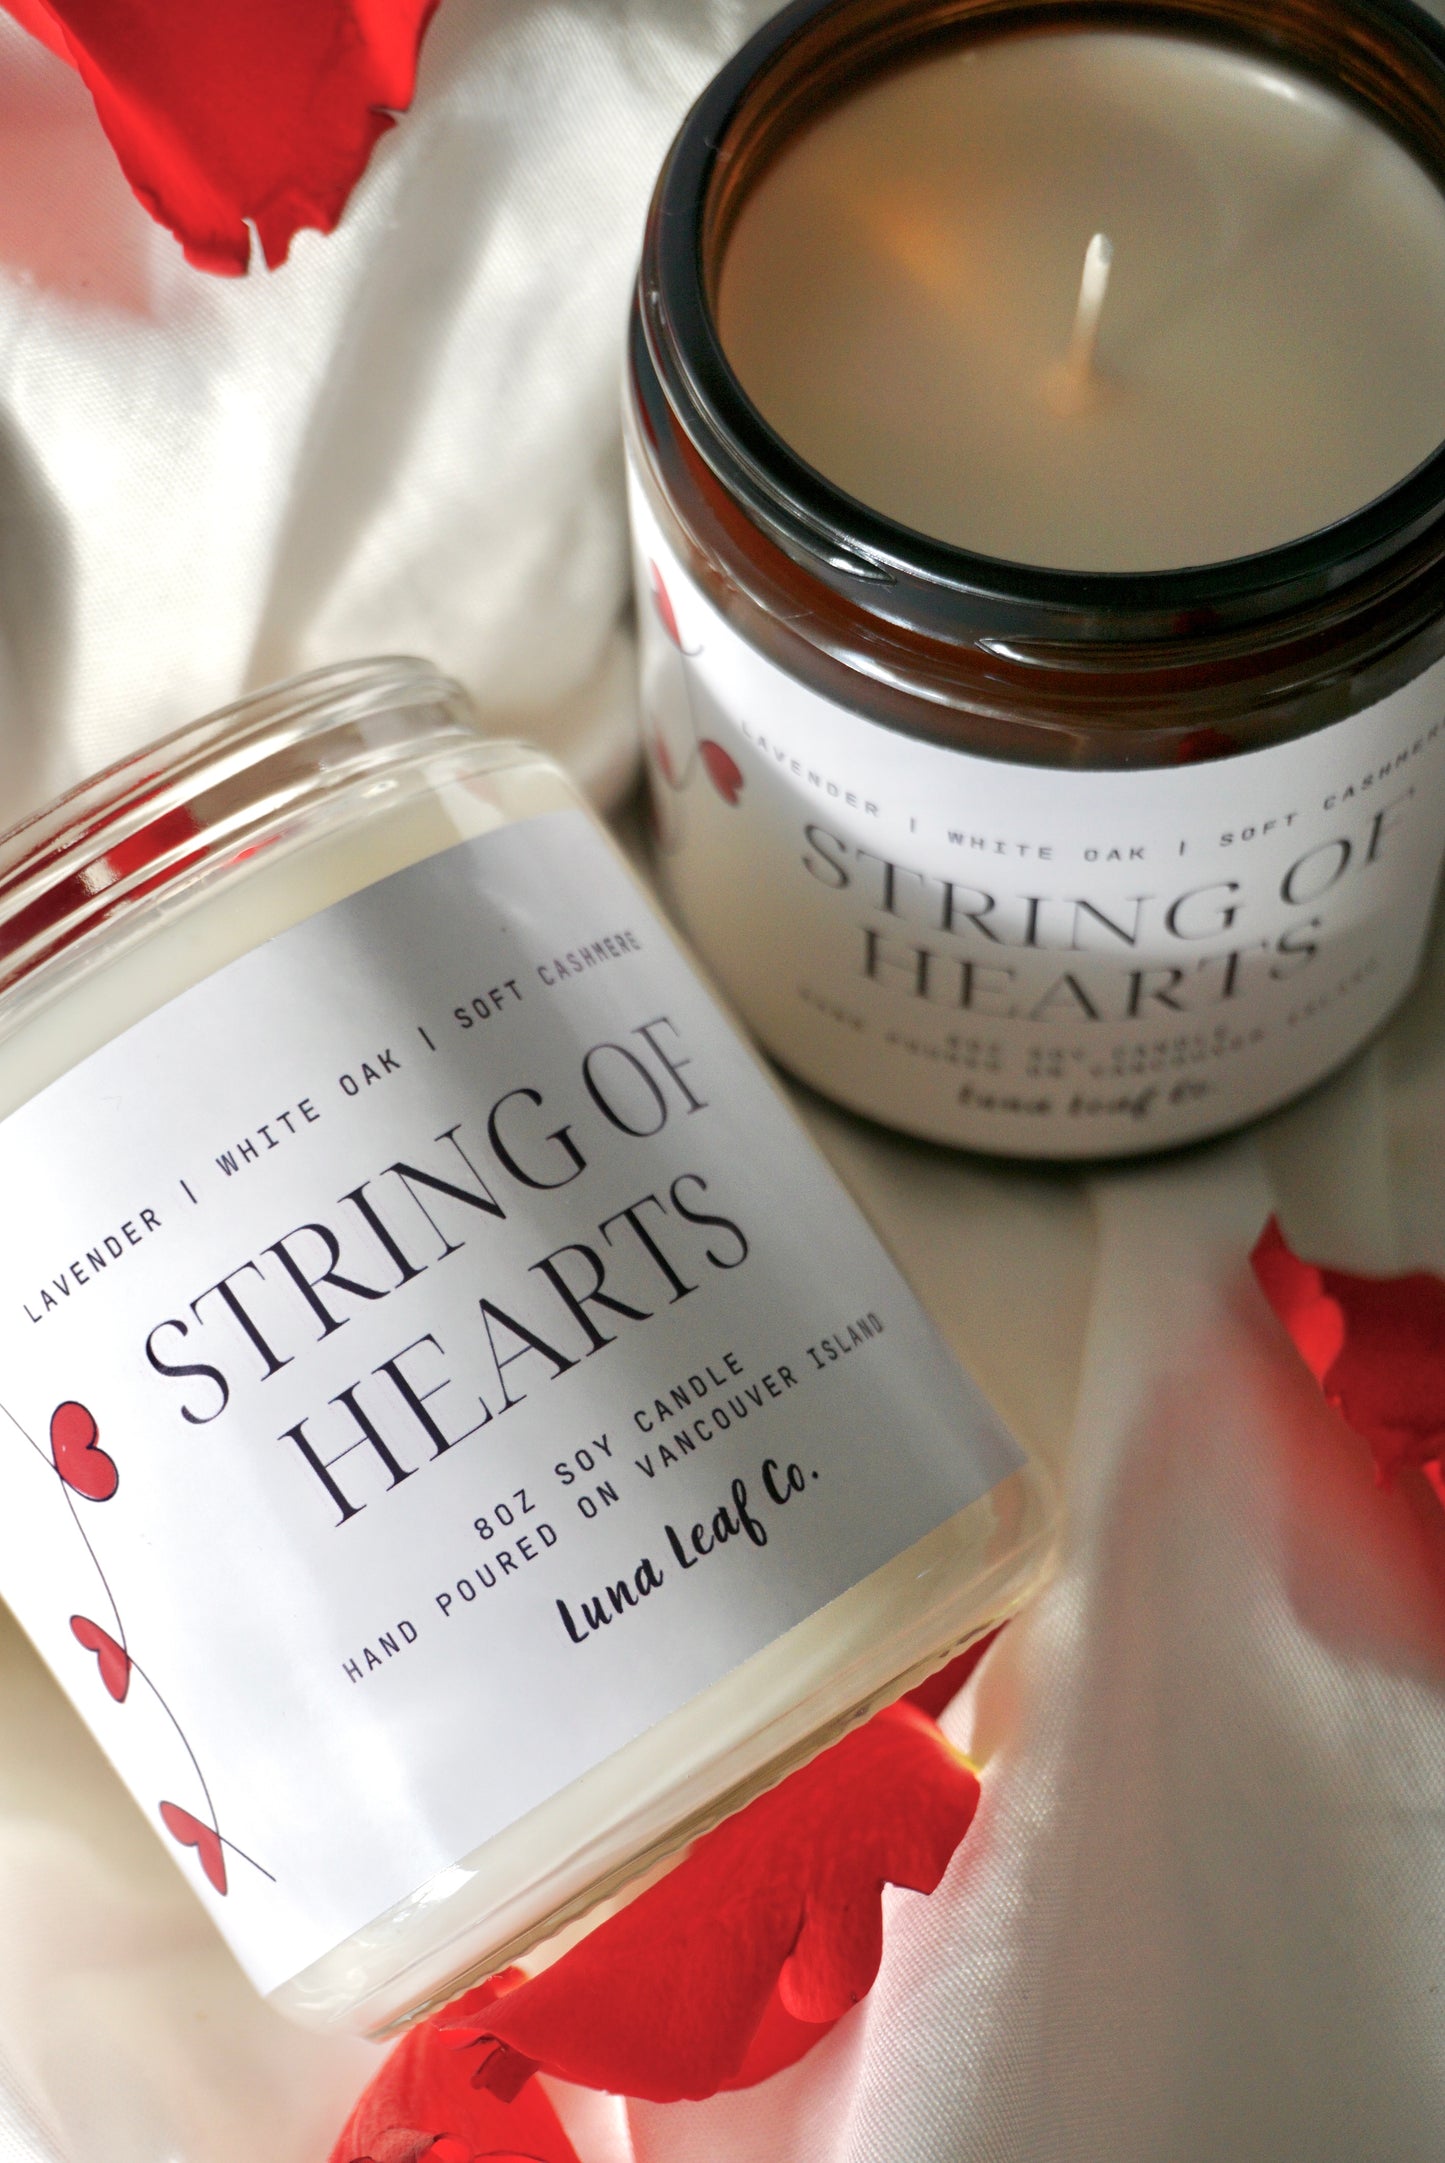 String of Hearts Soy Candle